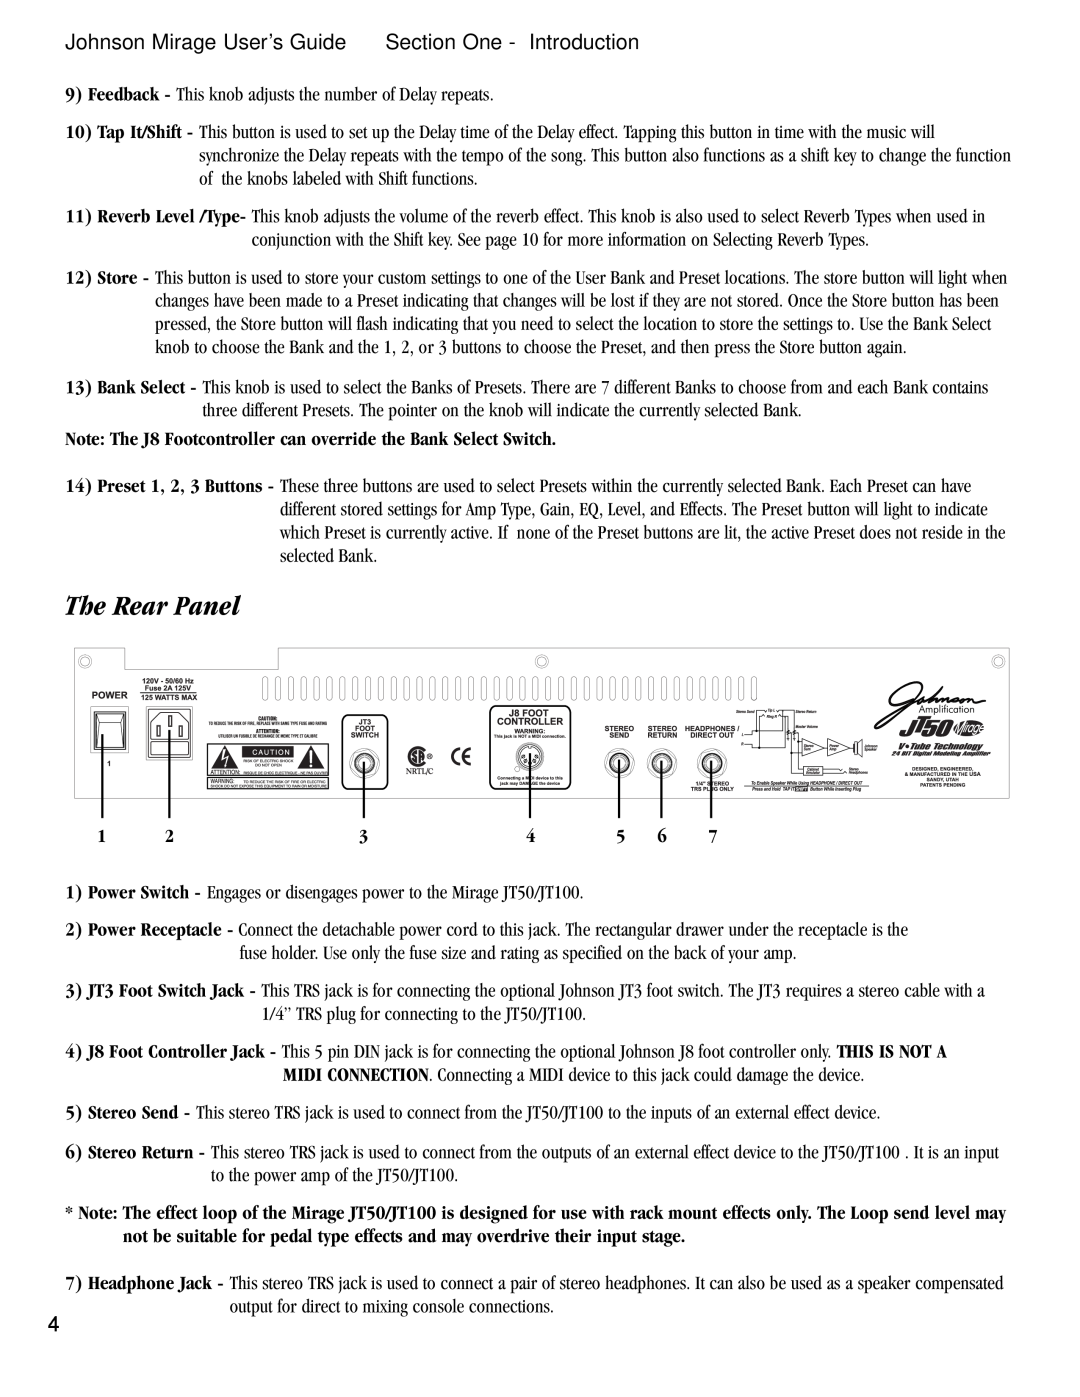 Harmony House JT50, JT100 manual The Rear Panel, Johnson Mirage User’s Guide, Section One - Introduction 